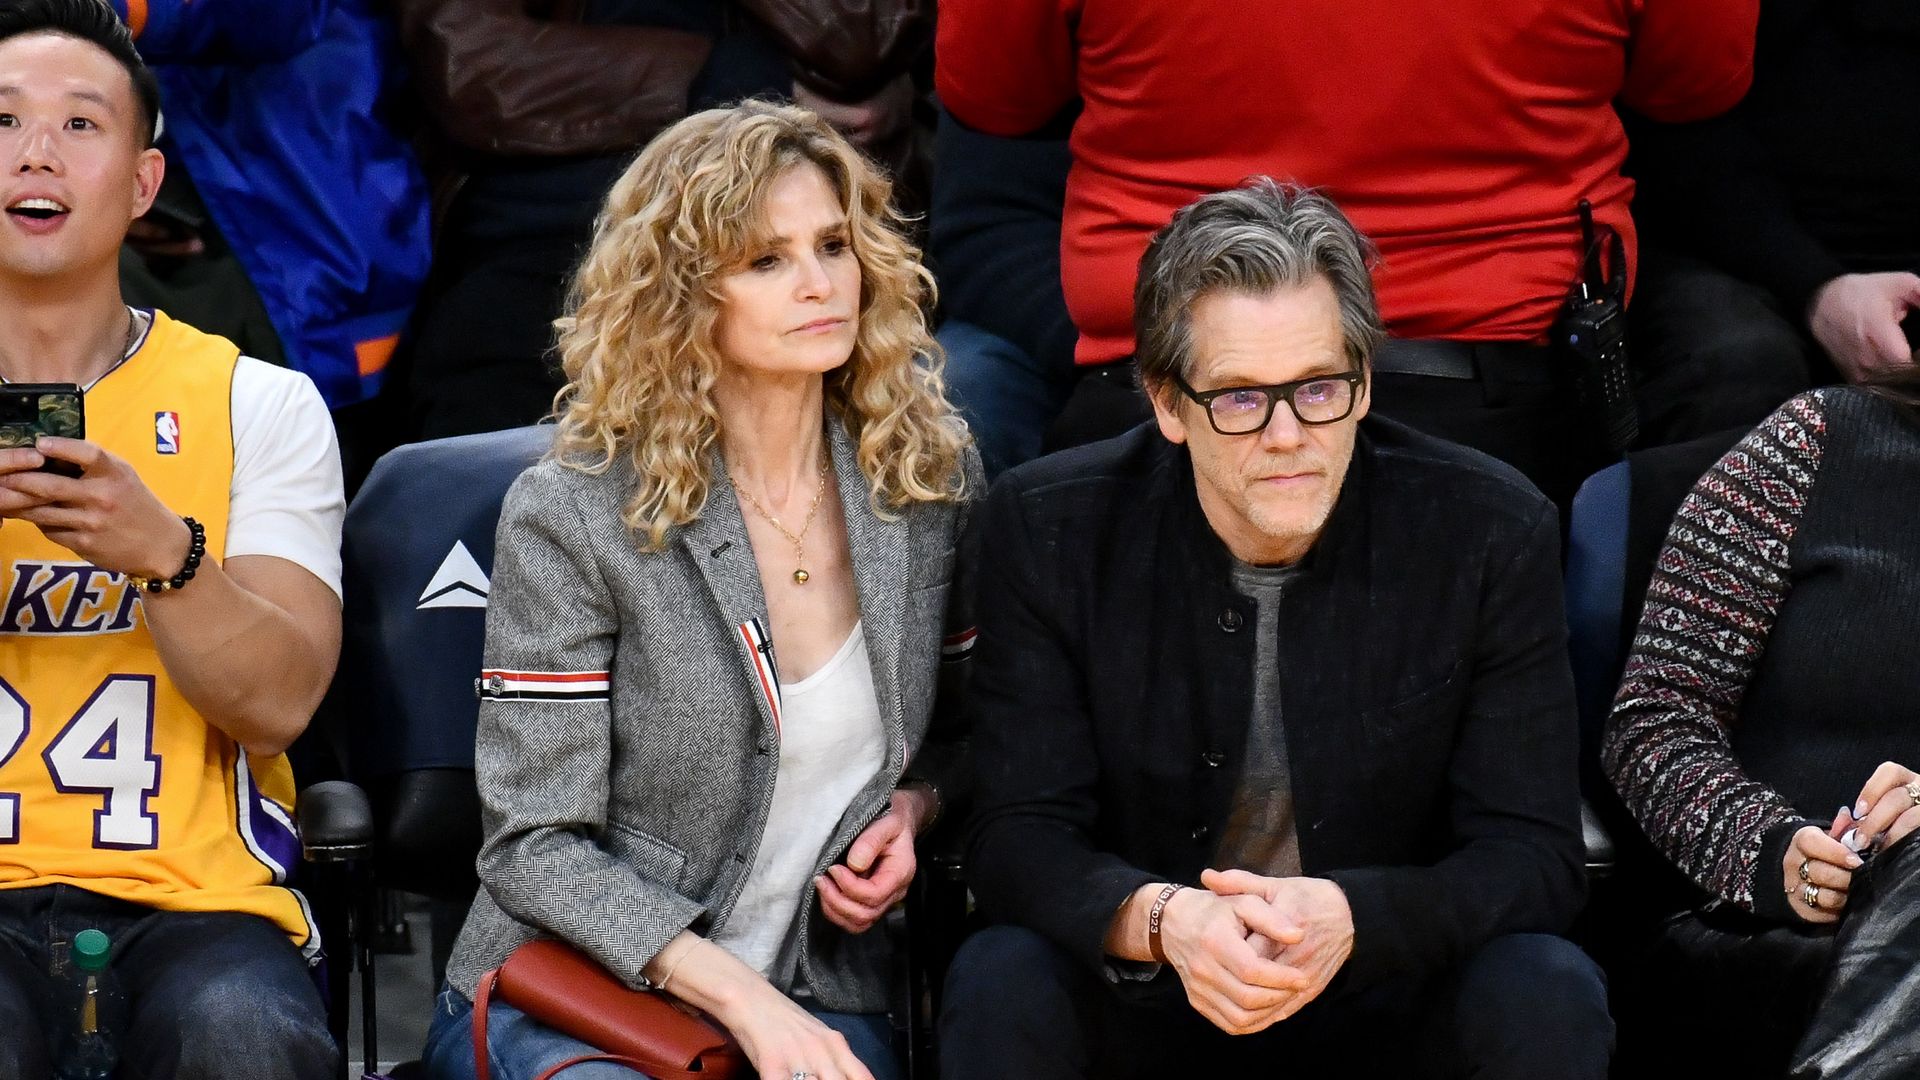 Kevin Bacon and Kyra Sedgwick attend a basketball game between the Los Angeles Lakers and the New York Knicks at Crypto.com Arena on December 18, 2023 in Los Angeles, California. NOTE TO USER: User expressly acknowledges and agrees that, by downloading and or using this photograph, User is consenting to the terms and conditions of the Getty Images License Agreement. (Photo by Allen Berezovsky/Getty Images)